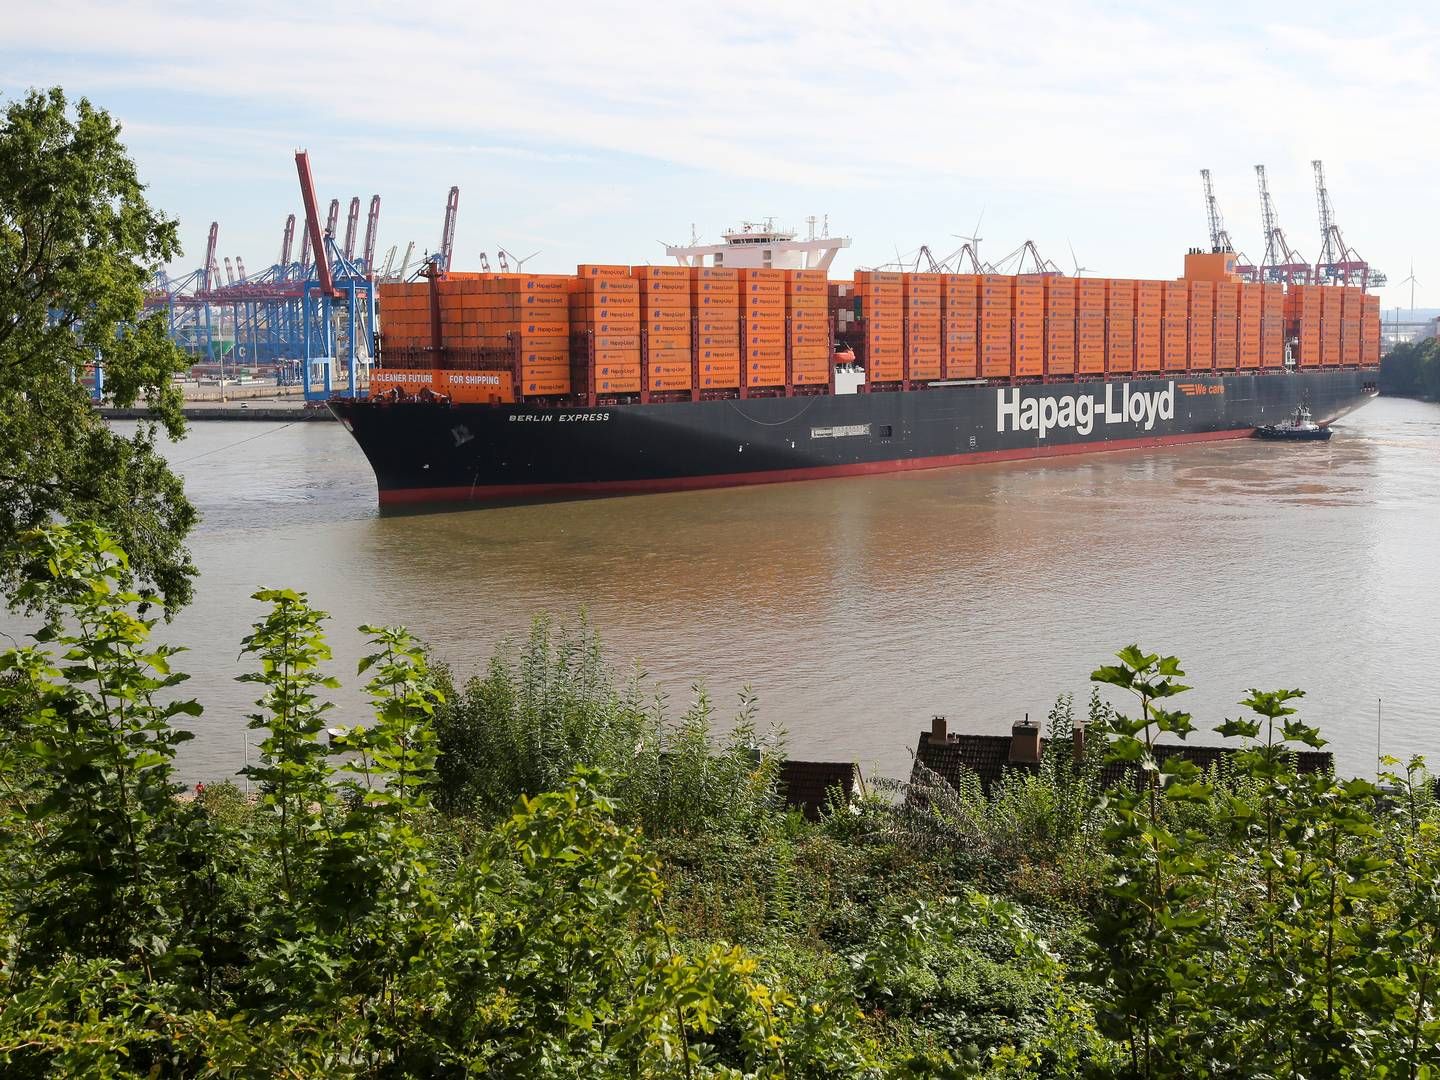 "We will have higher productivity in the terminals, and as such, that may allow us to sail a little bit slower and as such also reduce emissions," Hapag-Lloyd CEO Rolf Habben Jansen said on Wednesday about the potential of the upcoming collaboration with Maersk. | Foto: Bodo Marks/AP/Ritzau Scanpix